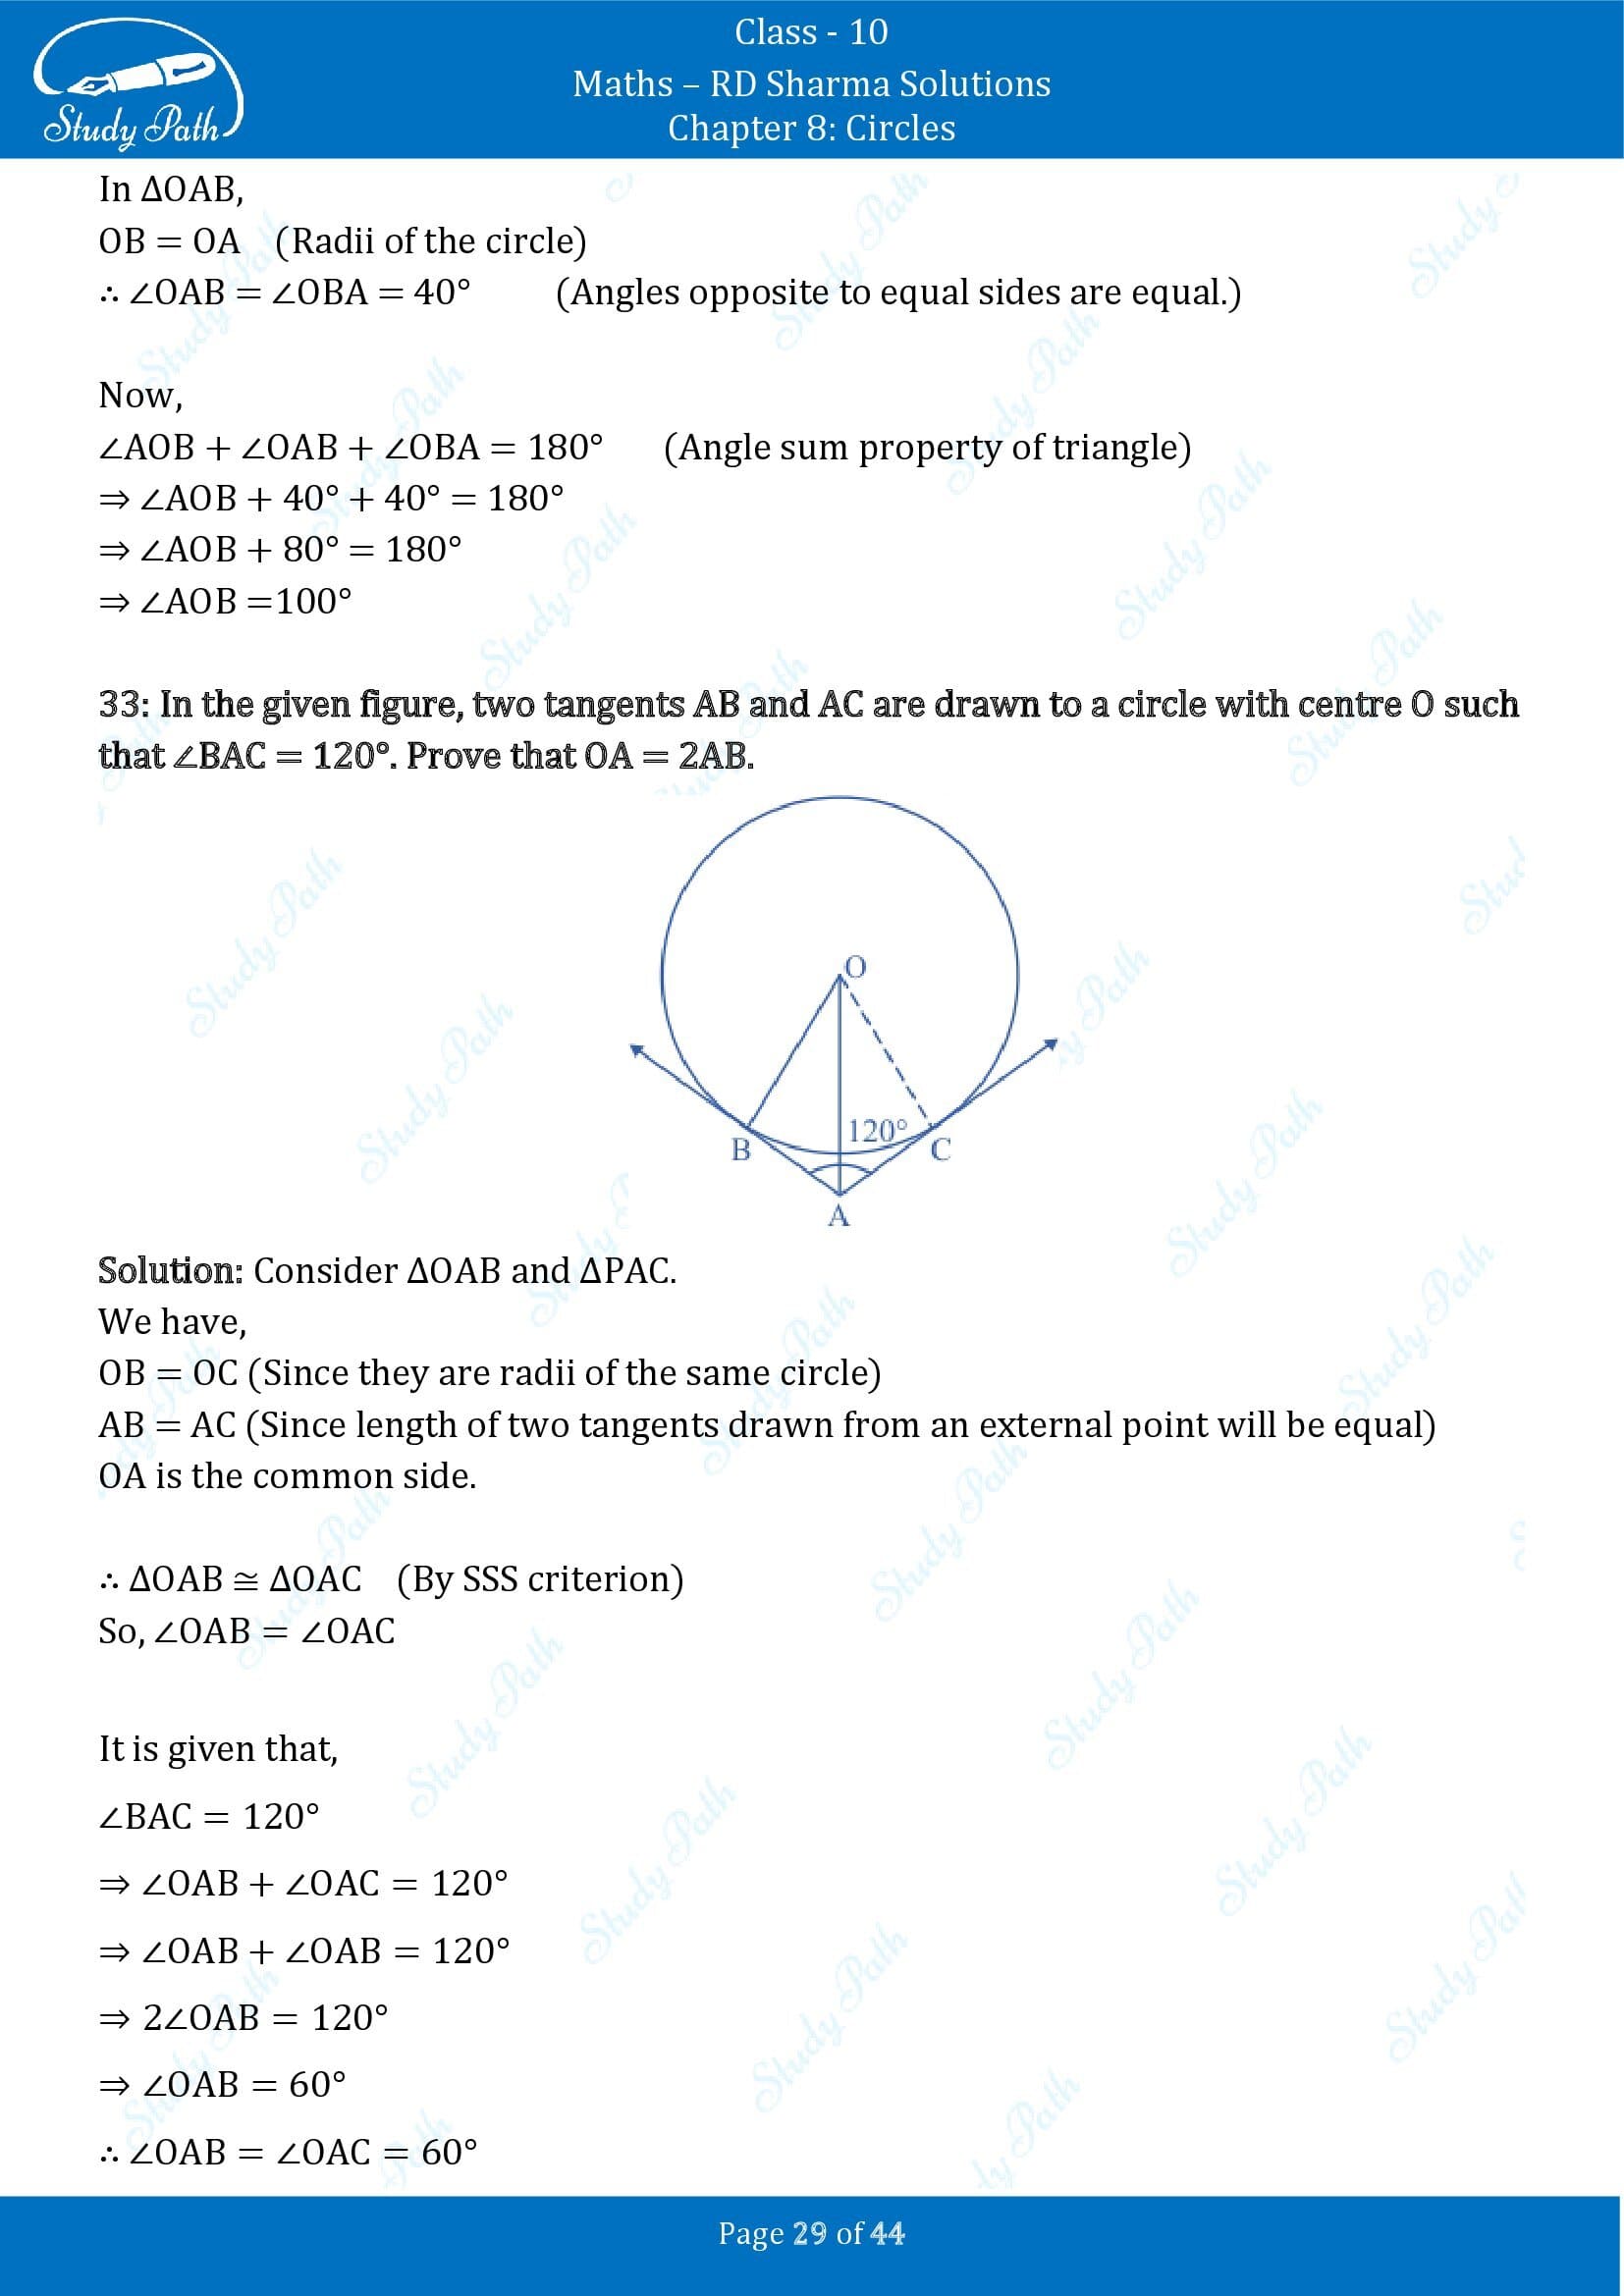 RD Sharma Solutions Class 10 Chapter 8 Circles Exercise 8.2 00029